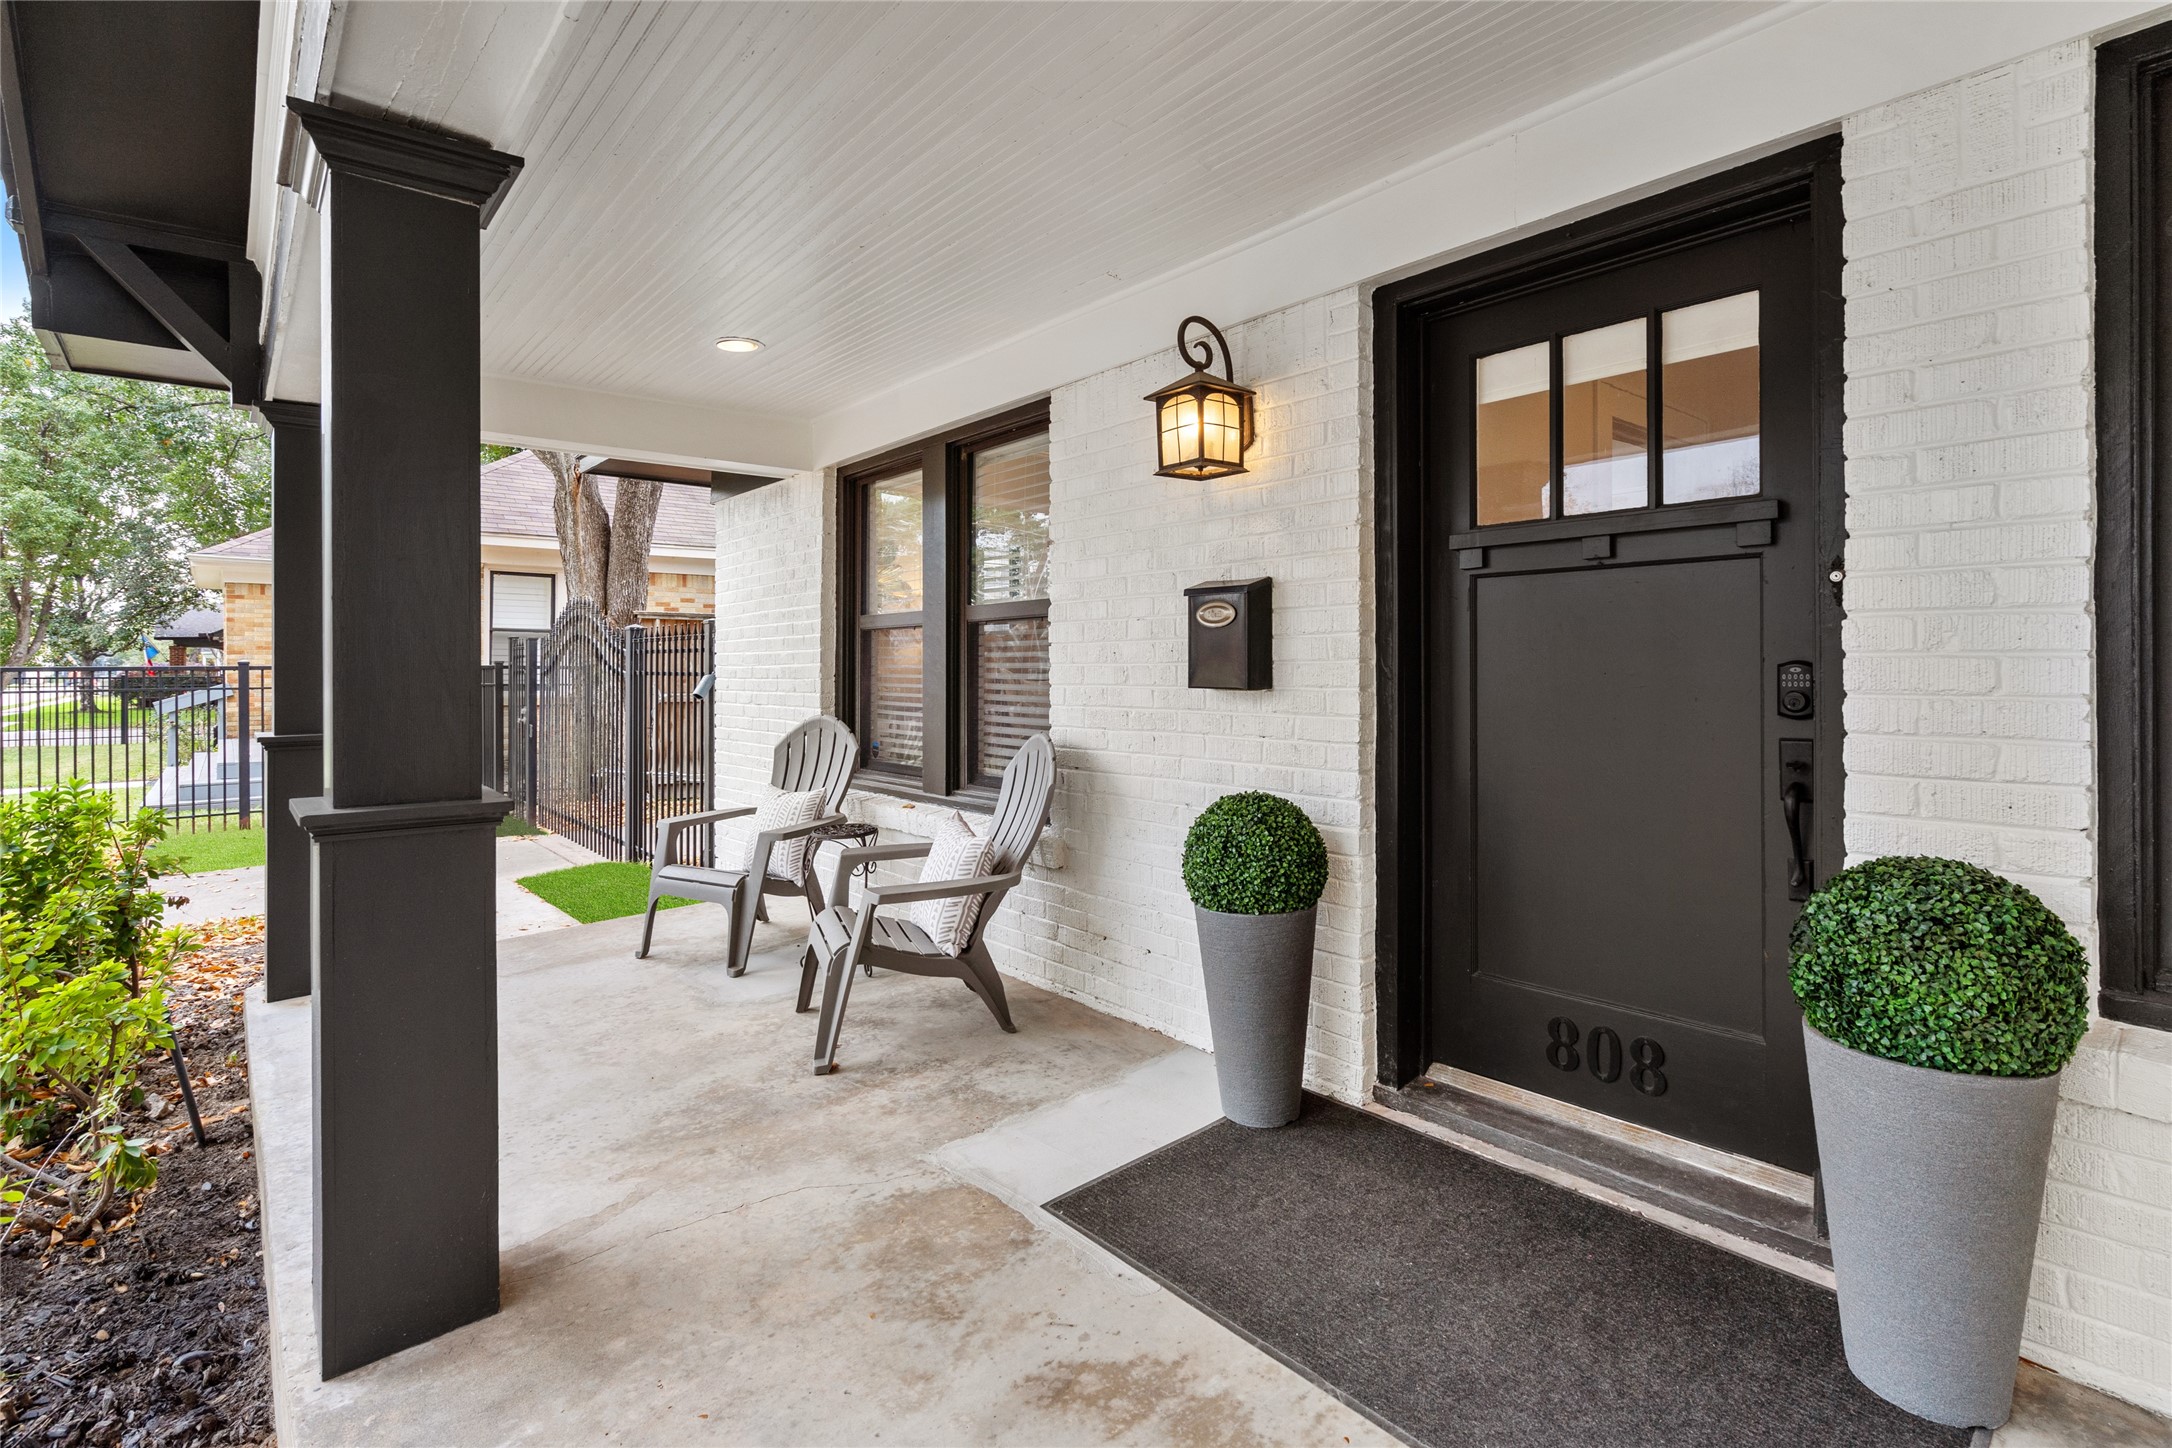 The front porch is  inviting and calling all to sit and enjoy the neighborhood.